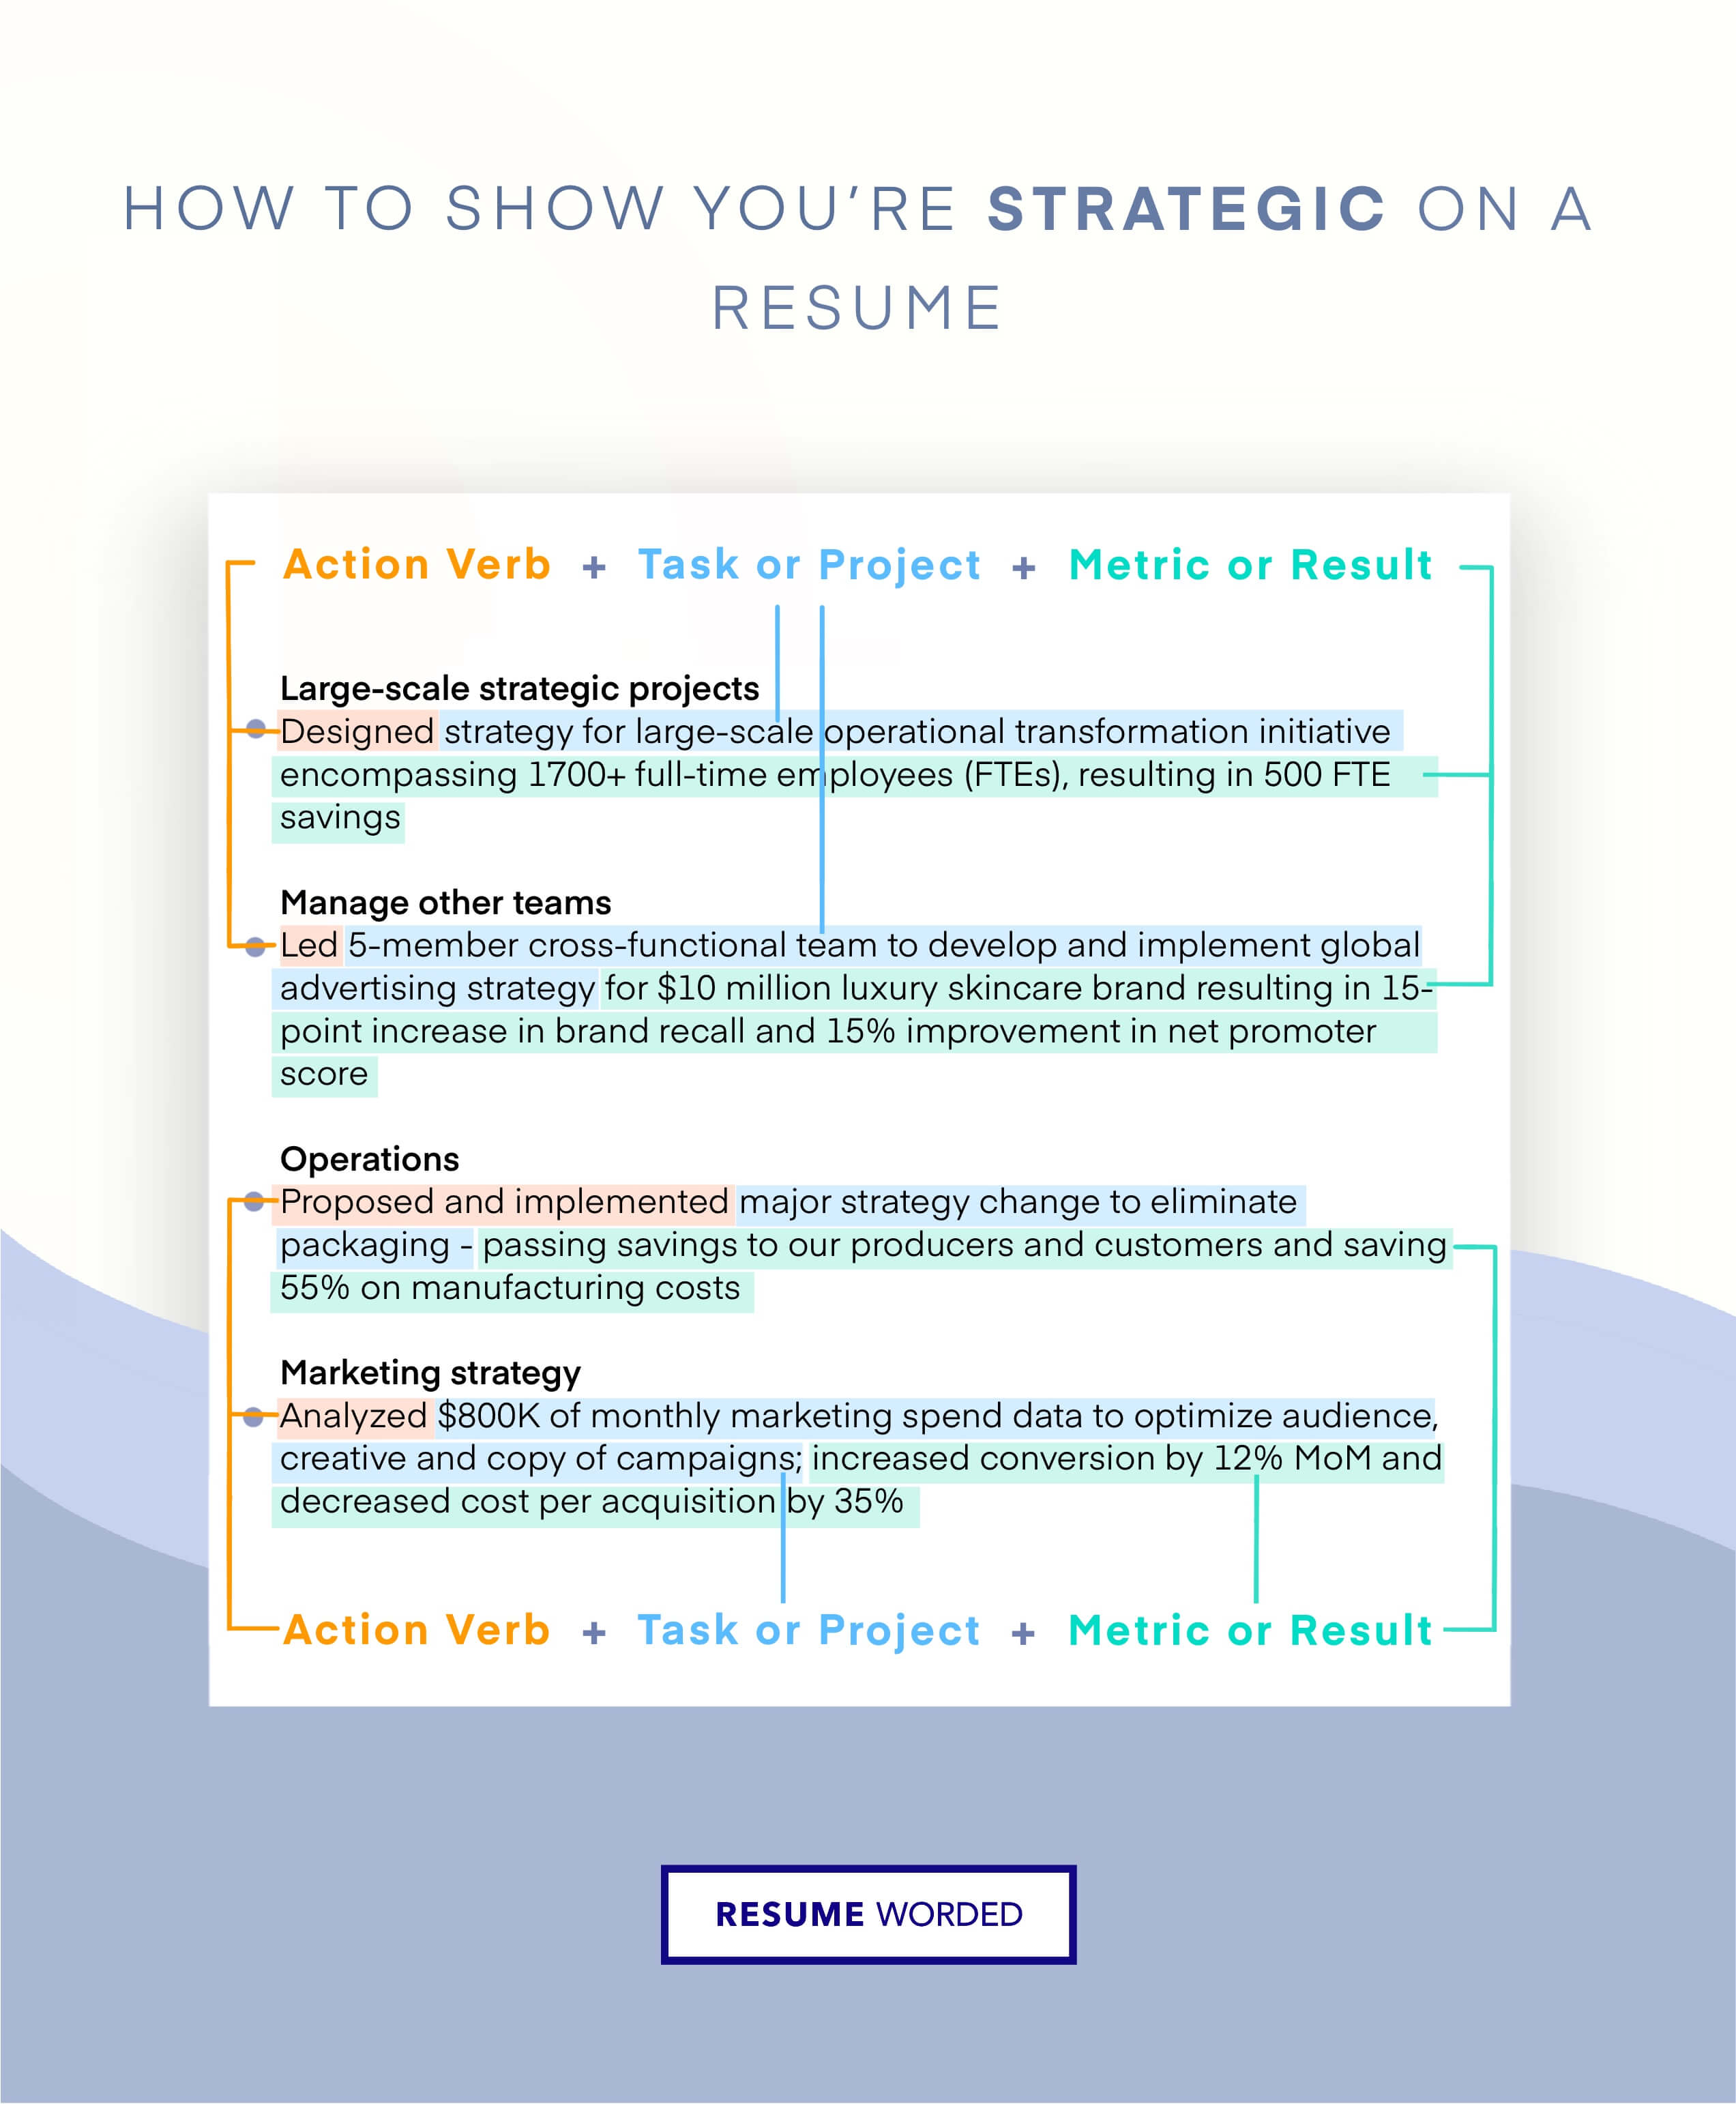 Demonstrate your leadership and strategic thinking - Senior Product Owner Resume